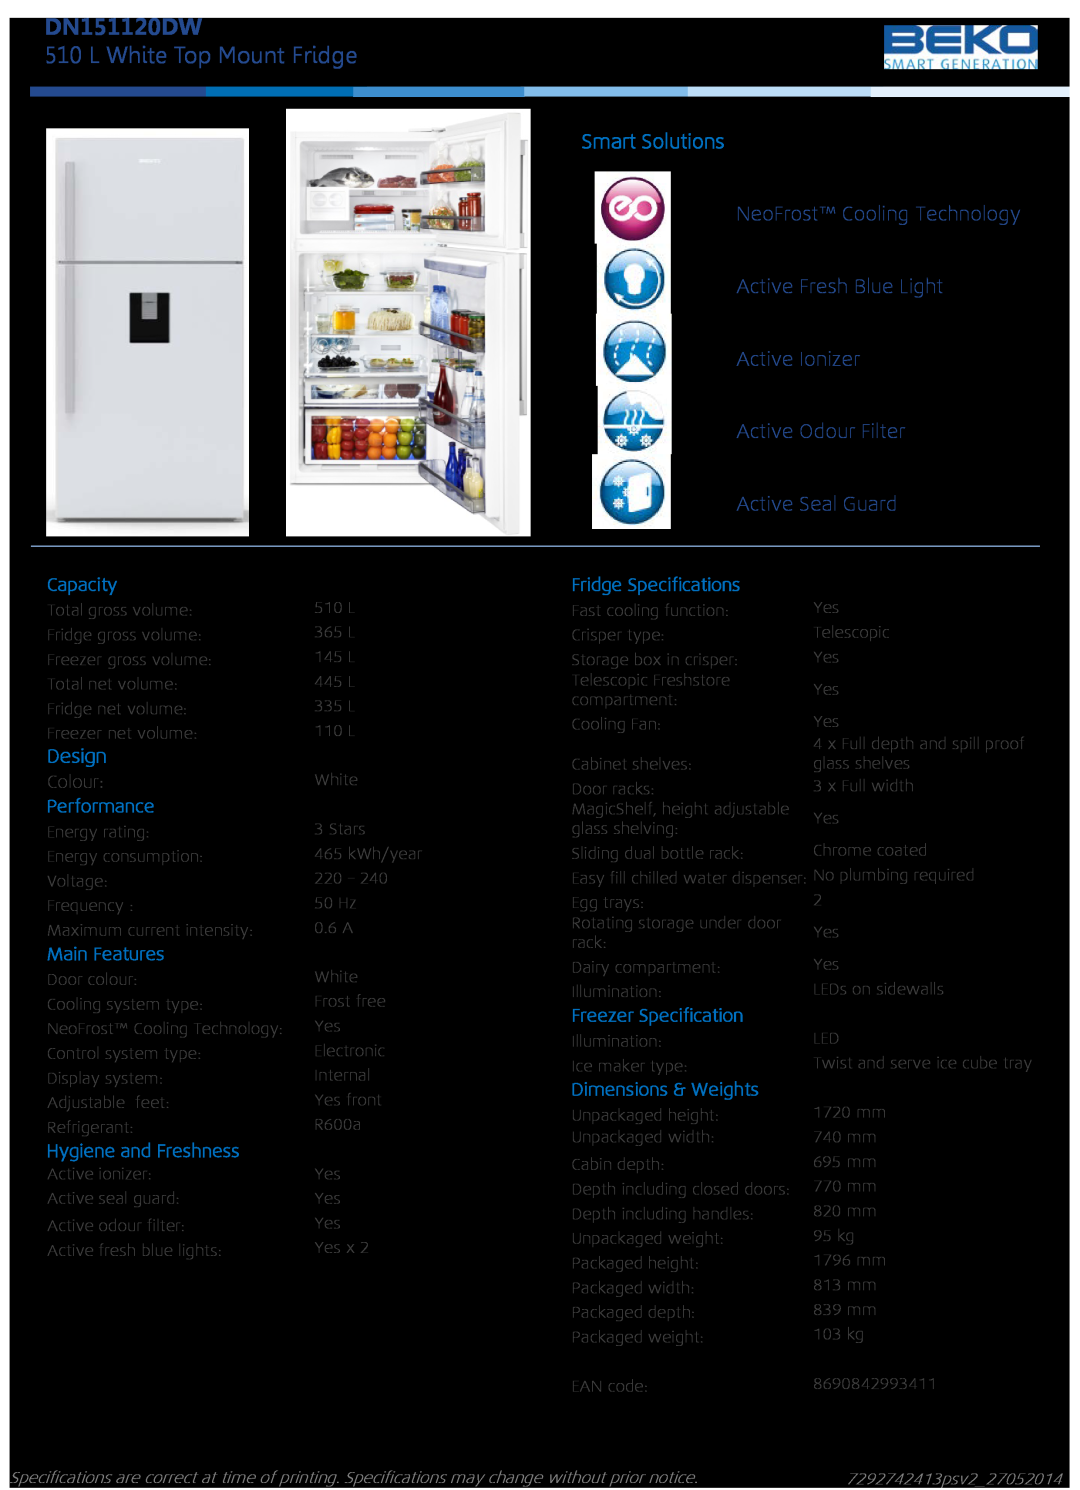 Beko DN151120DW specifications L White Top Mount Fridge, Smart Solutions, NeoFrost Cooling Technology, Design, Capacity 